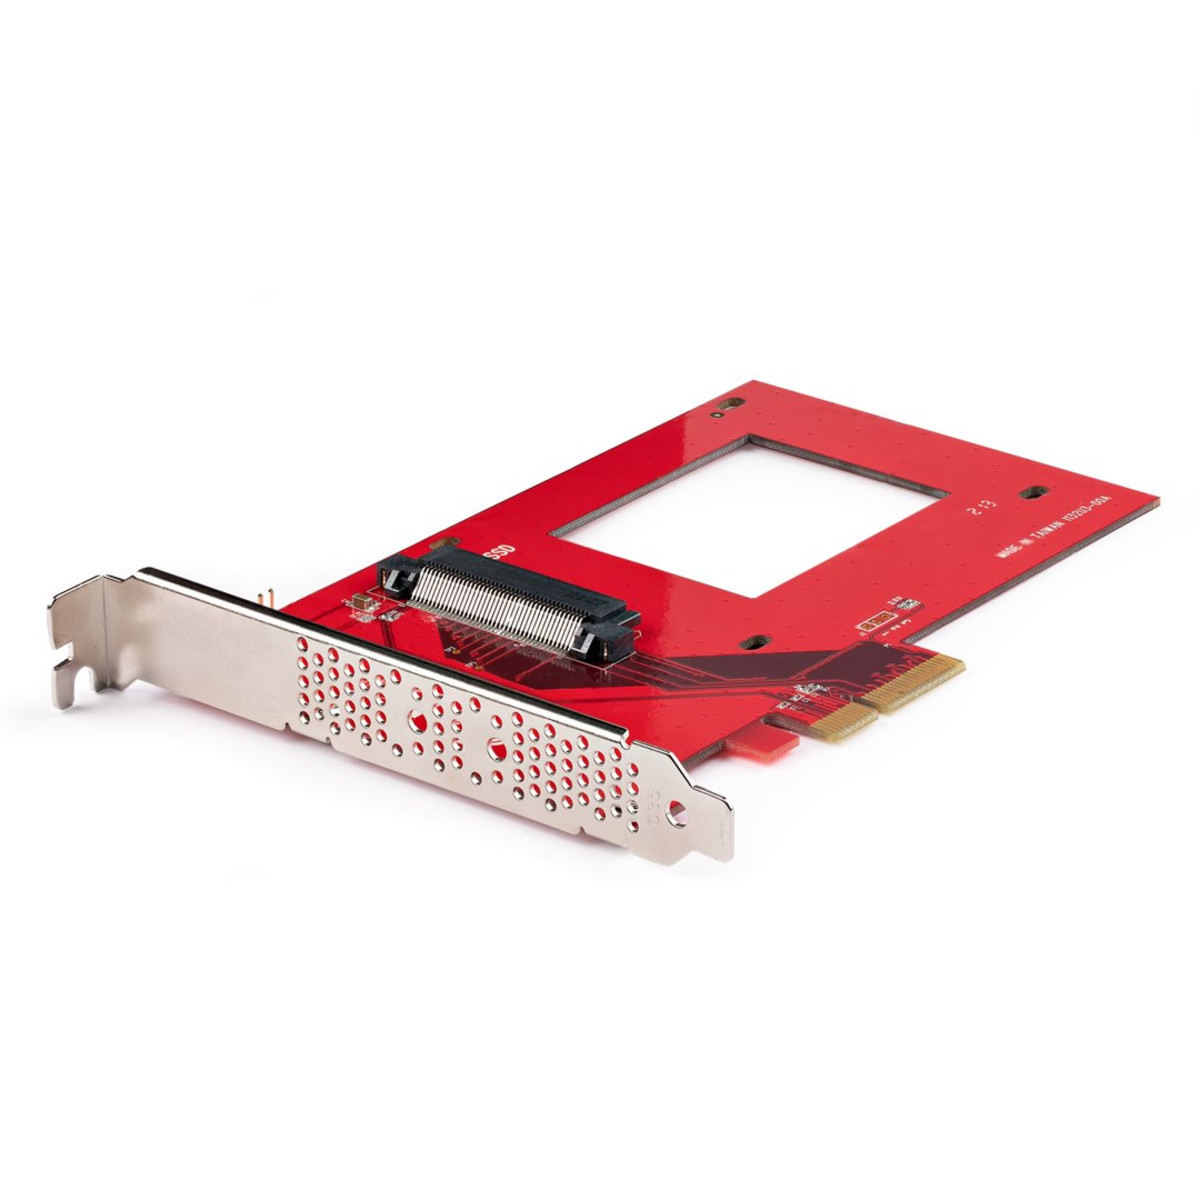 U.3 to PCIe Adapter Card For U.3 SSDs